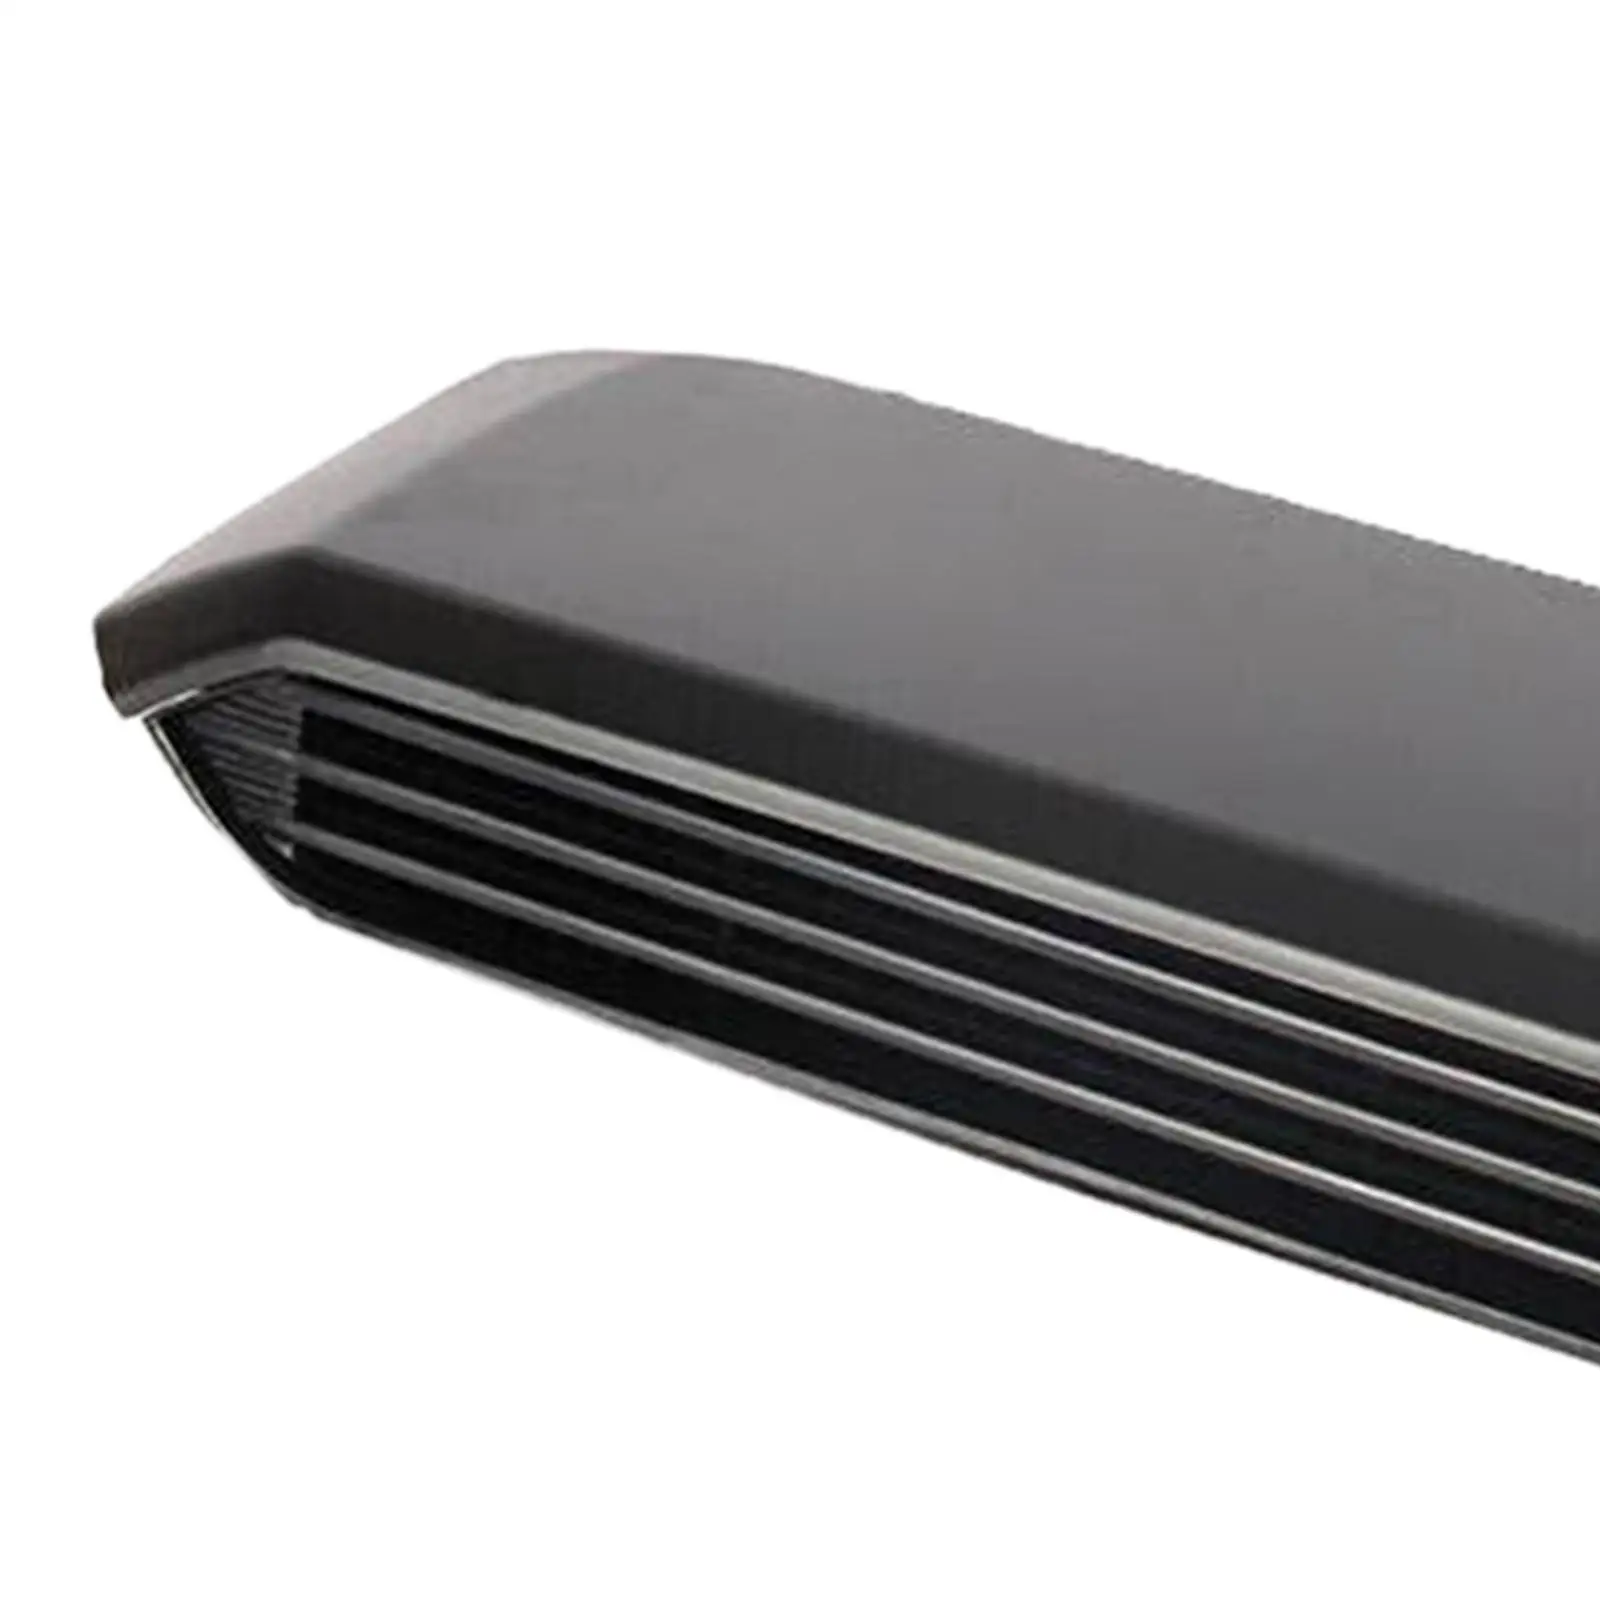 Hood Scoop Kit High Performance 76181-04900 for Toyota for tacoma